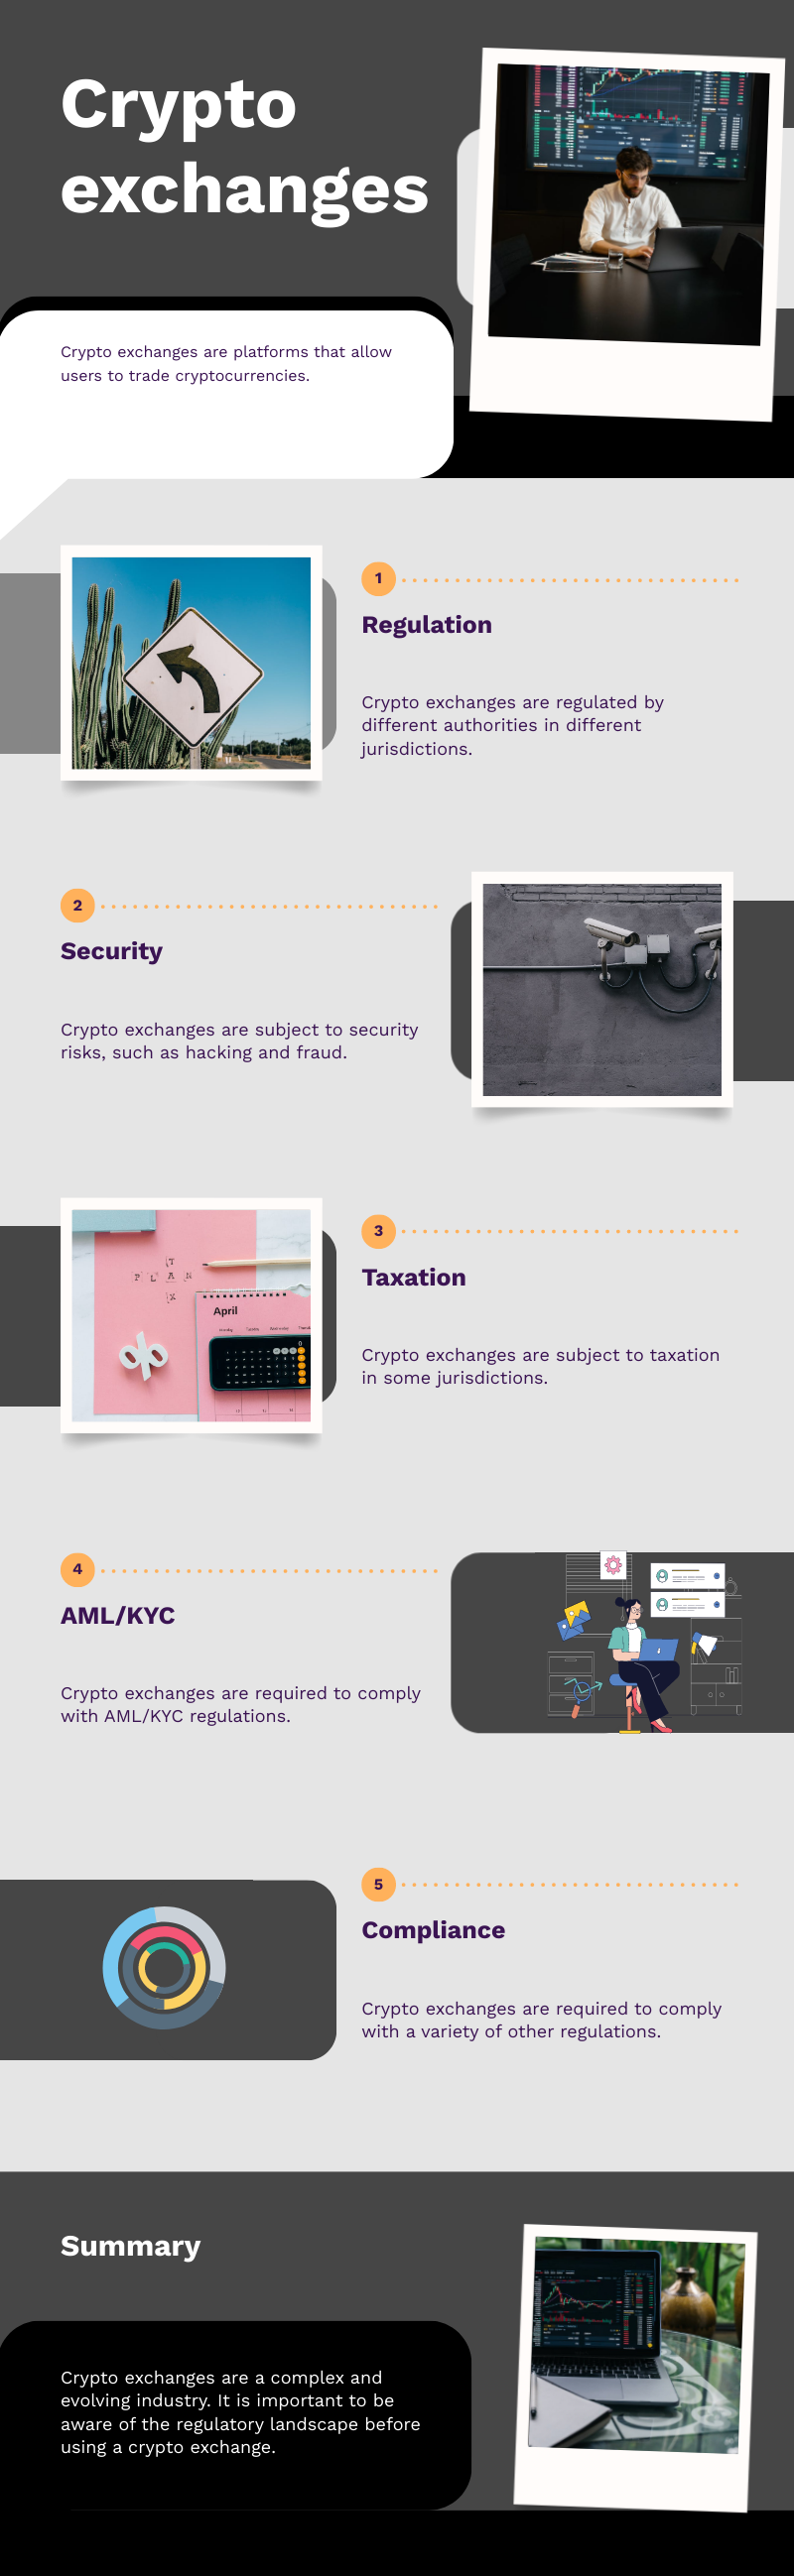 "Infographic titled 'Crypto exchanges' details their functions and regulations. Highlights include regulation by authorities, security risks like hacking, taxation requirements, AML/KYC compliance, and other regulatory compliances, urging awareness of the regulatory landscape before using an exchange.